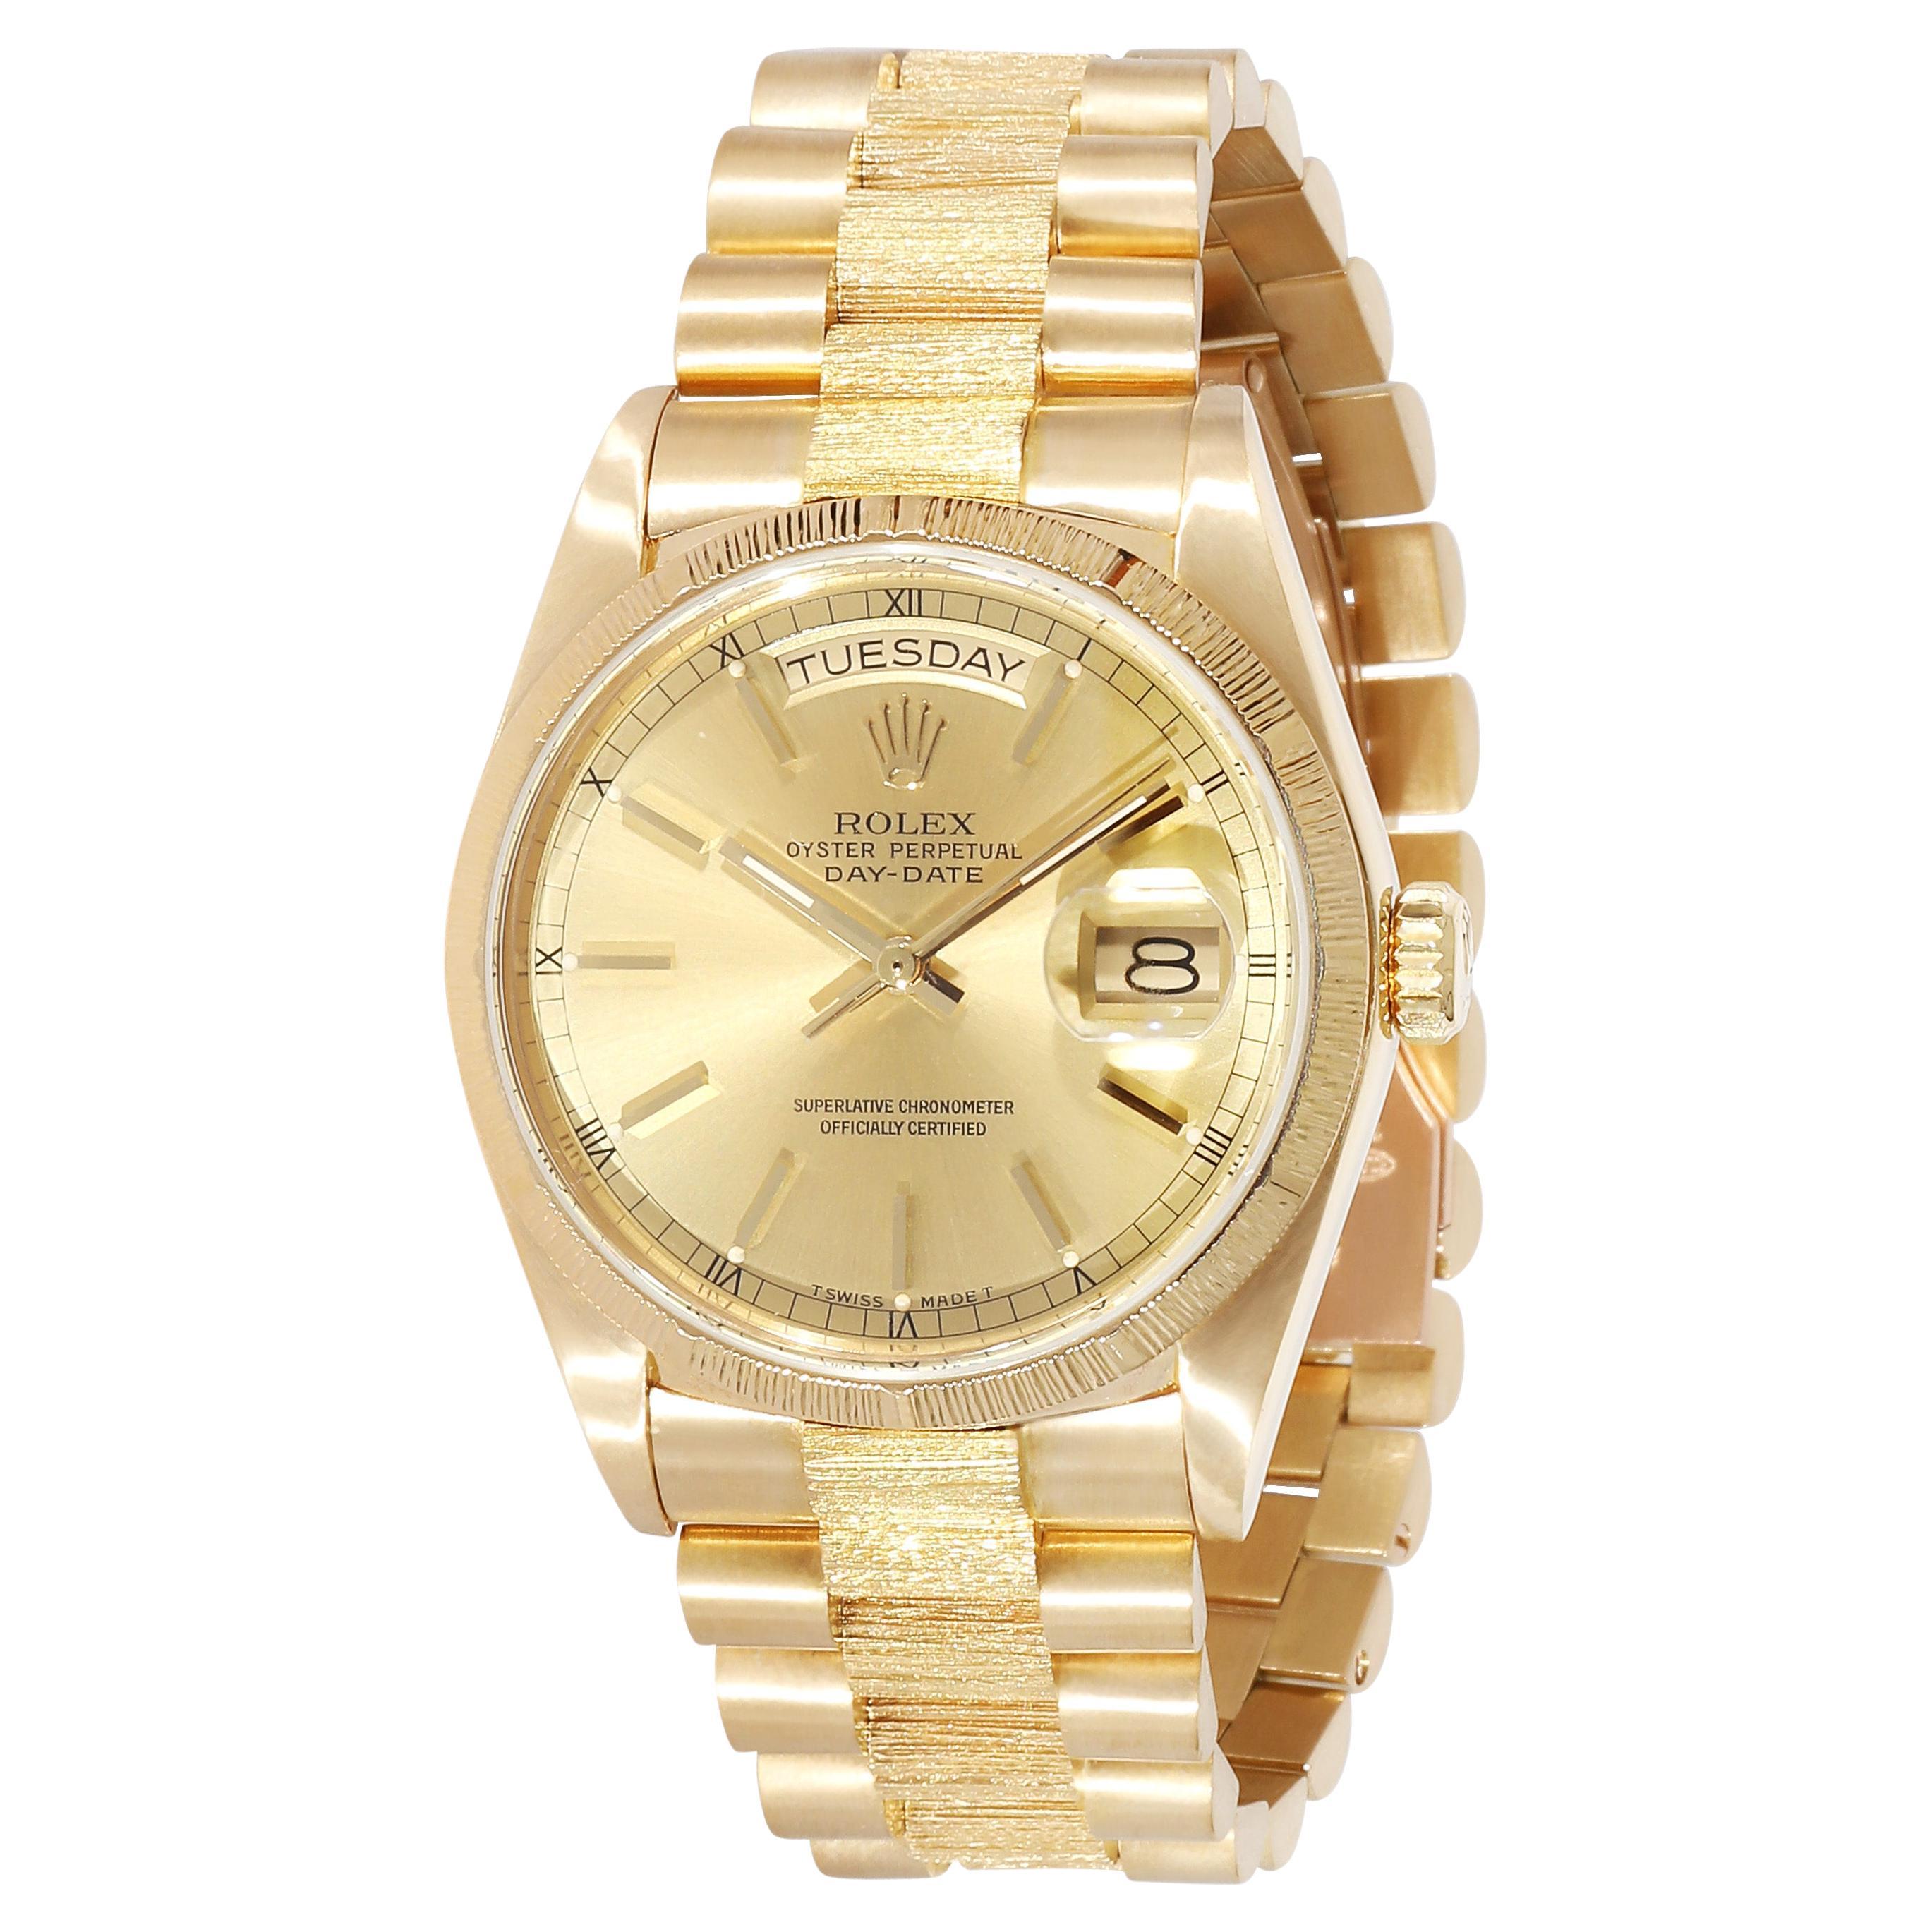 Rolex Day-Date 18078 Men's Watch in 18kt Yellow Gold